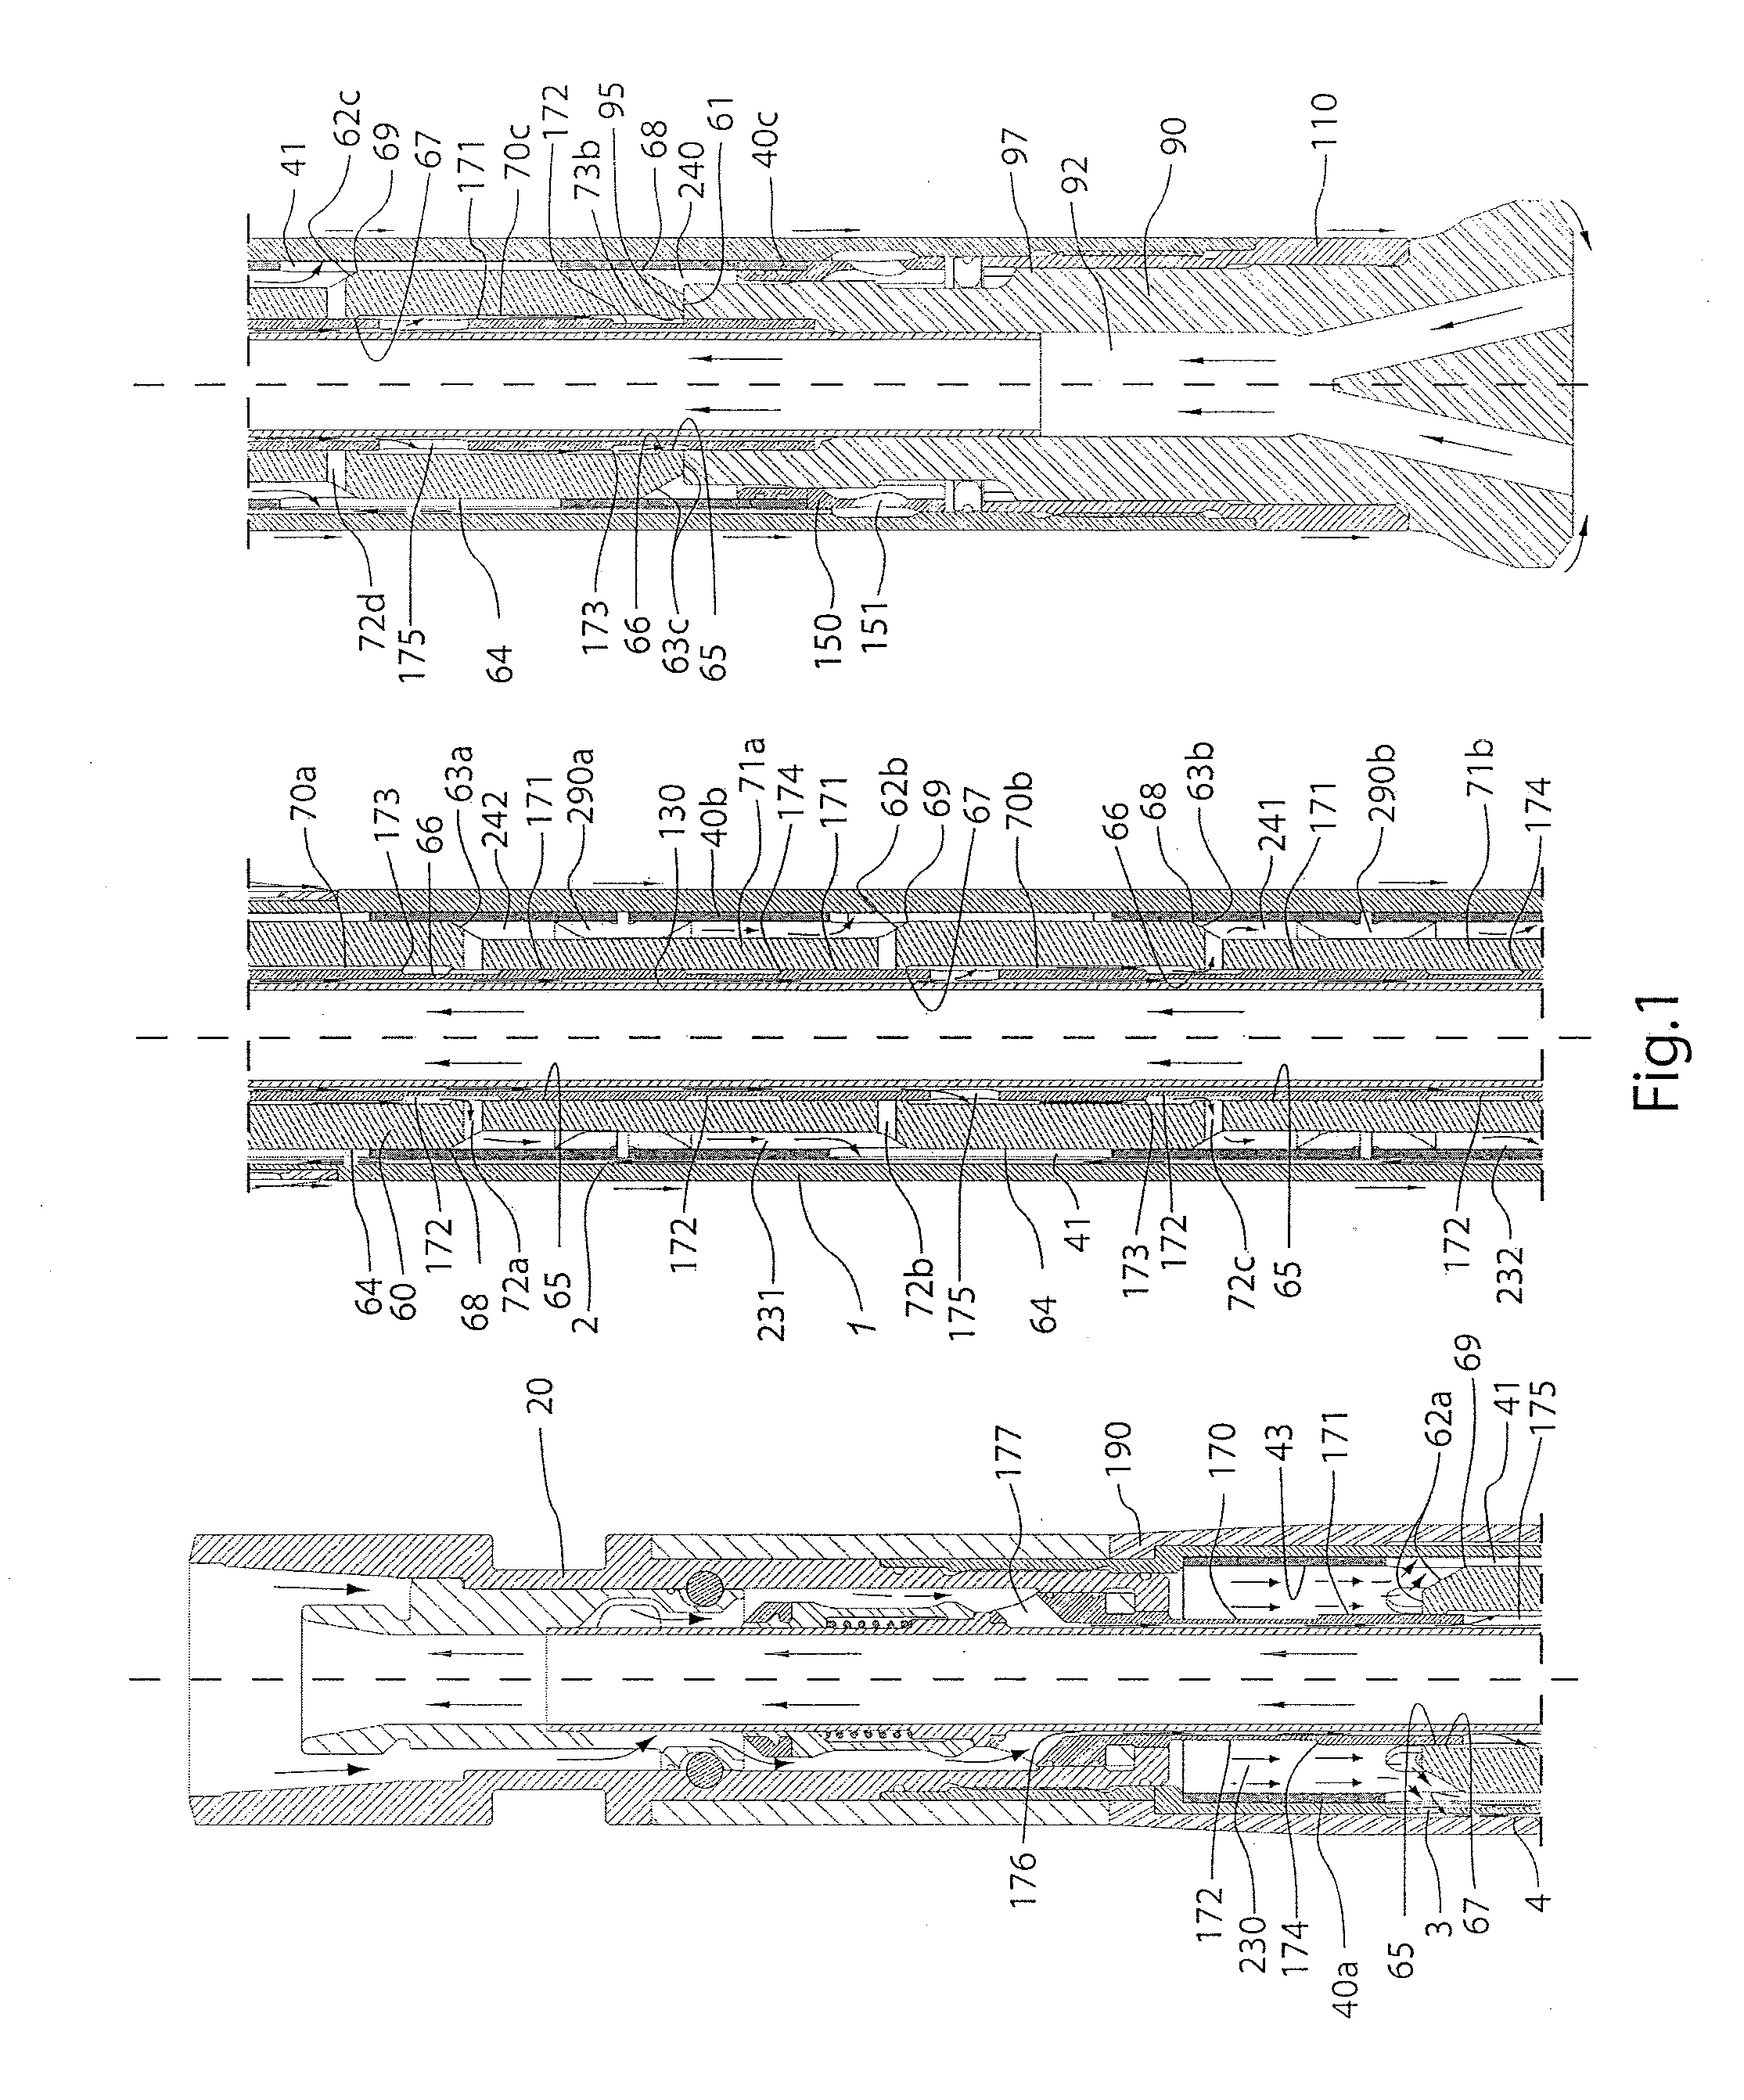 Pressurized fluid flow system having multiple work chambers for a down-the-hole drill hammer and normal and reverse circulation hammers thereof